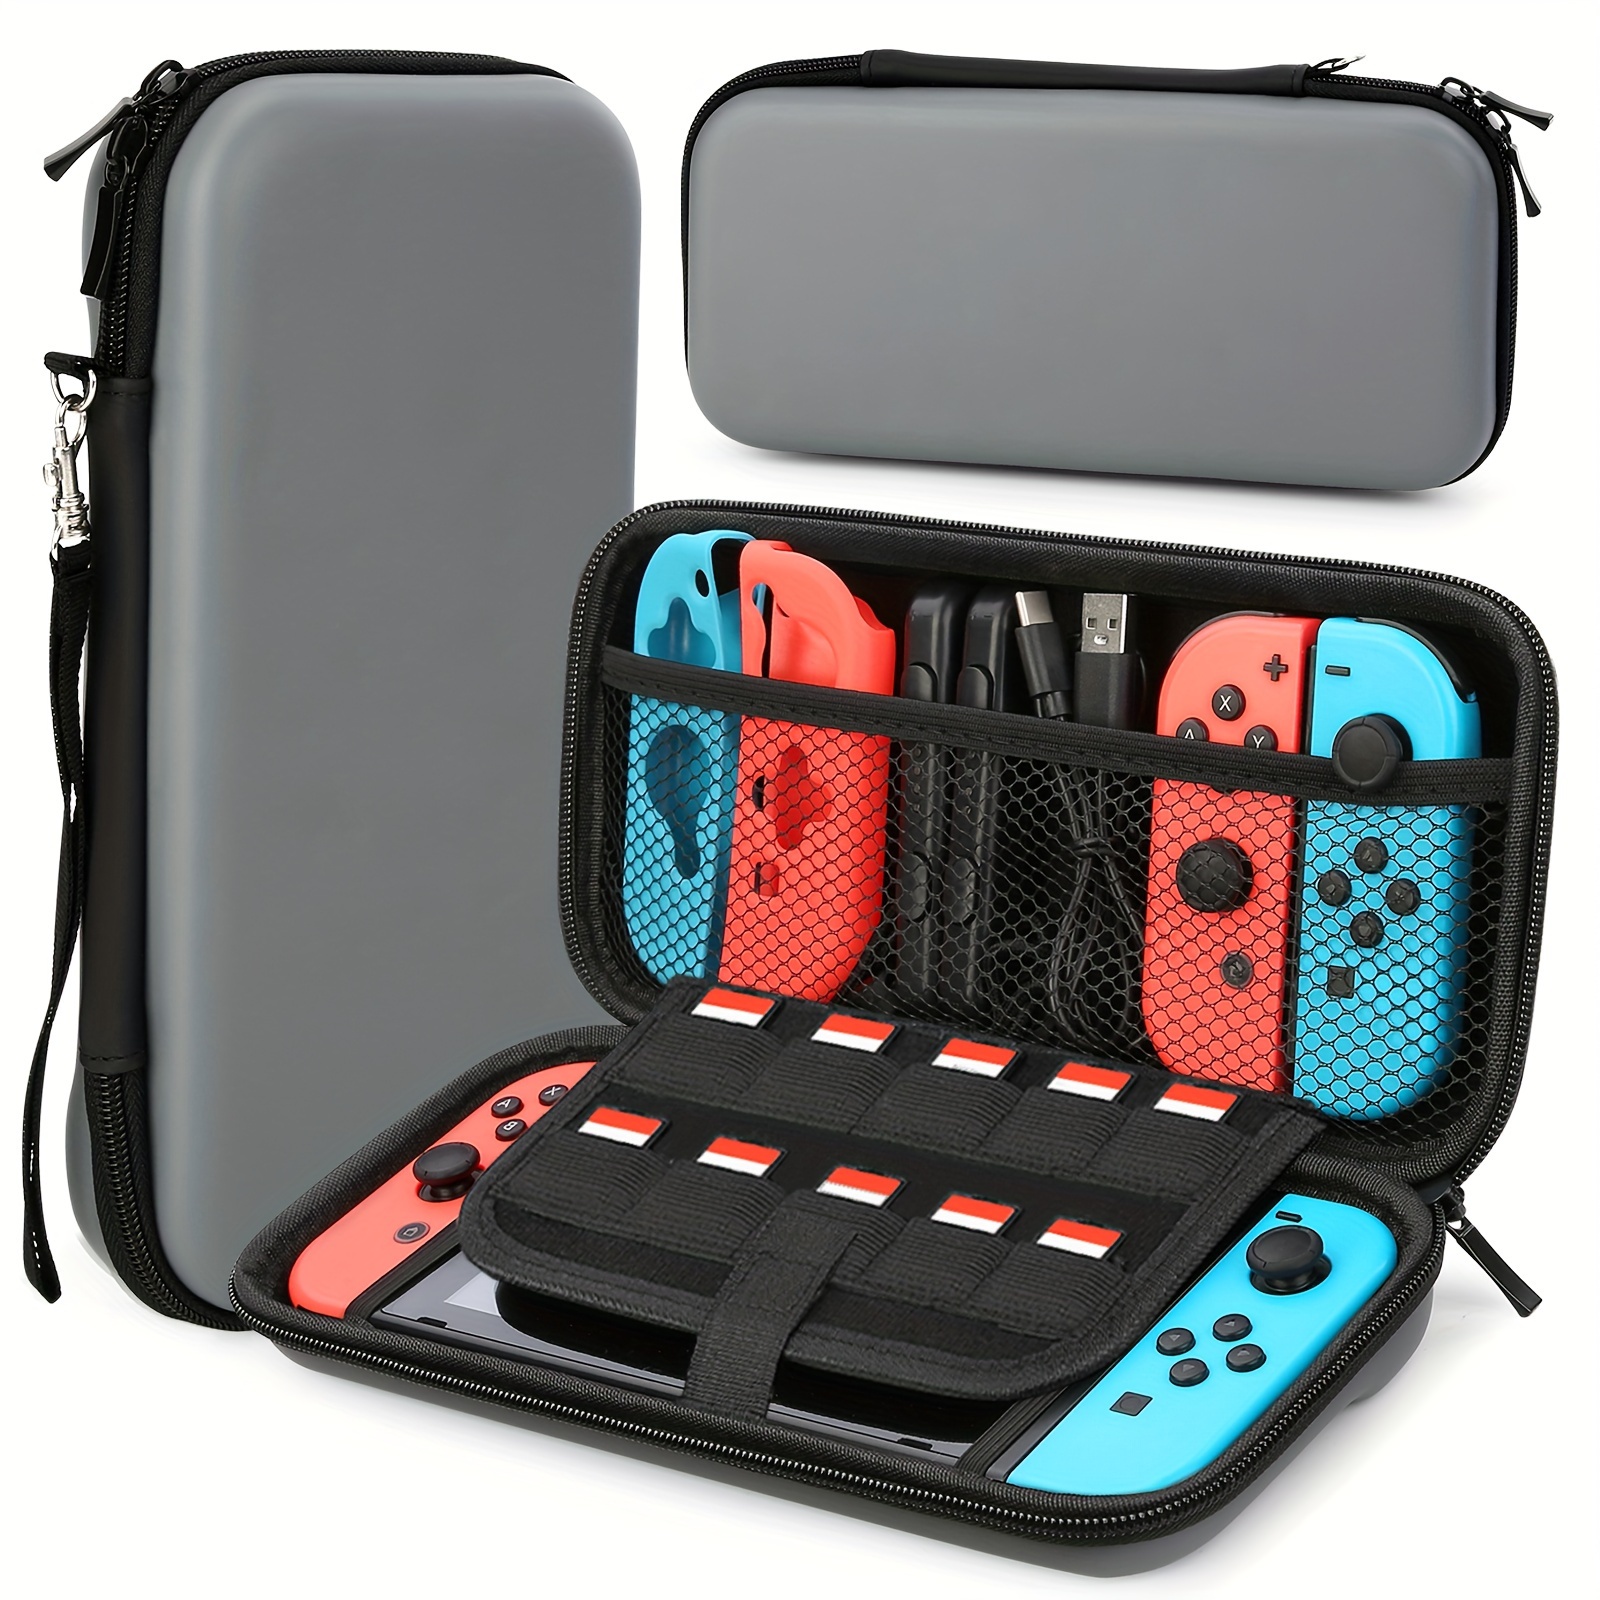 

Nintendo Switch Carrying Case - Durable, Anti-drop Hard Shell Storage Bag With Protective Handbag Design For Console & Accessories Nintendo Switch Protective Case Nintendo Switch Bag